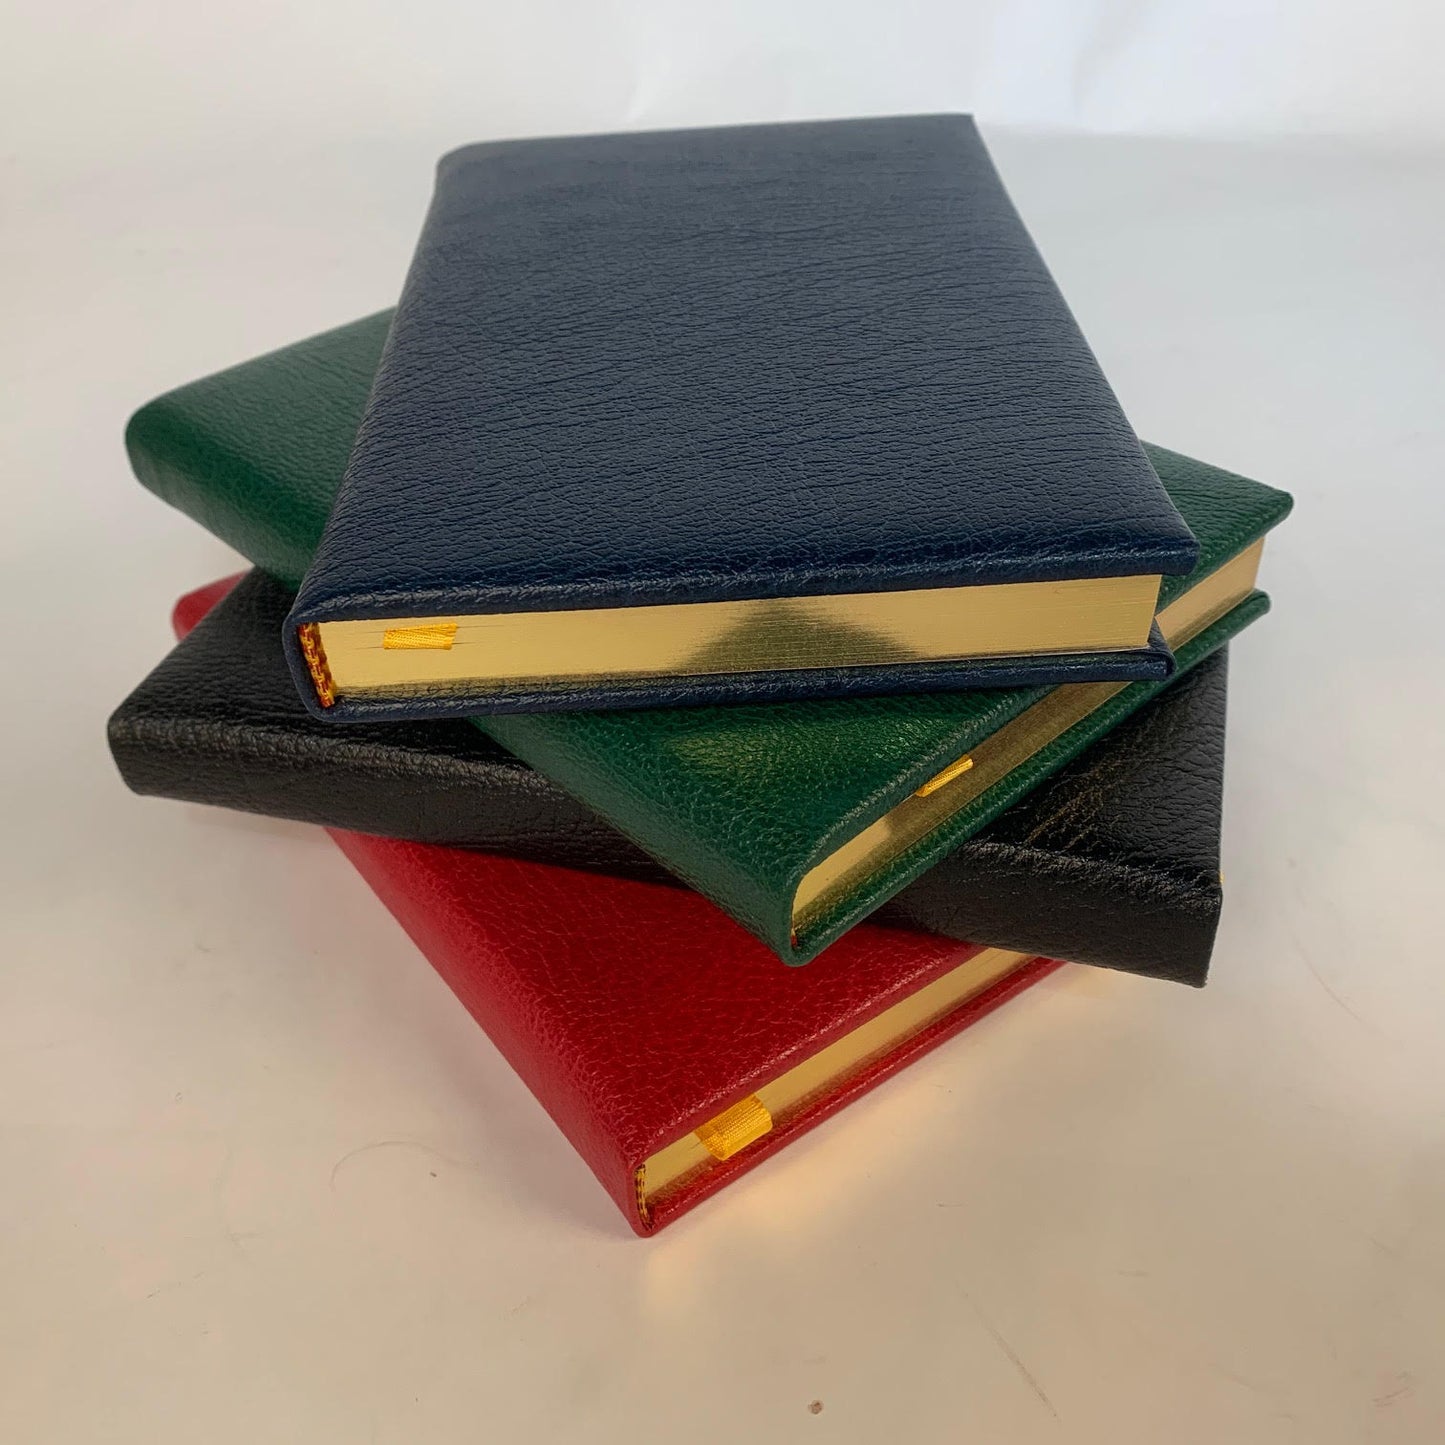 Leather Notebook | 7x4" | Hard Back Textured Leather | Titled: Garden Notes | Blank Pages